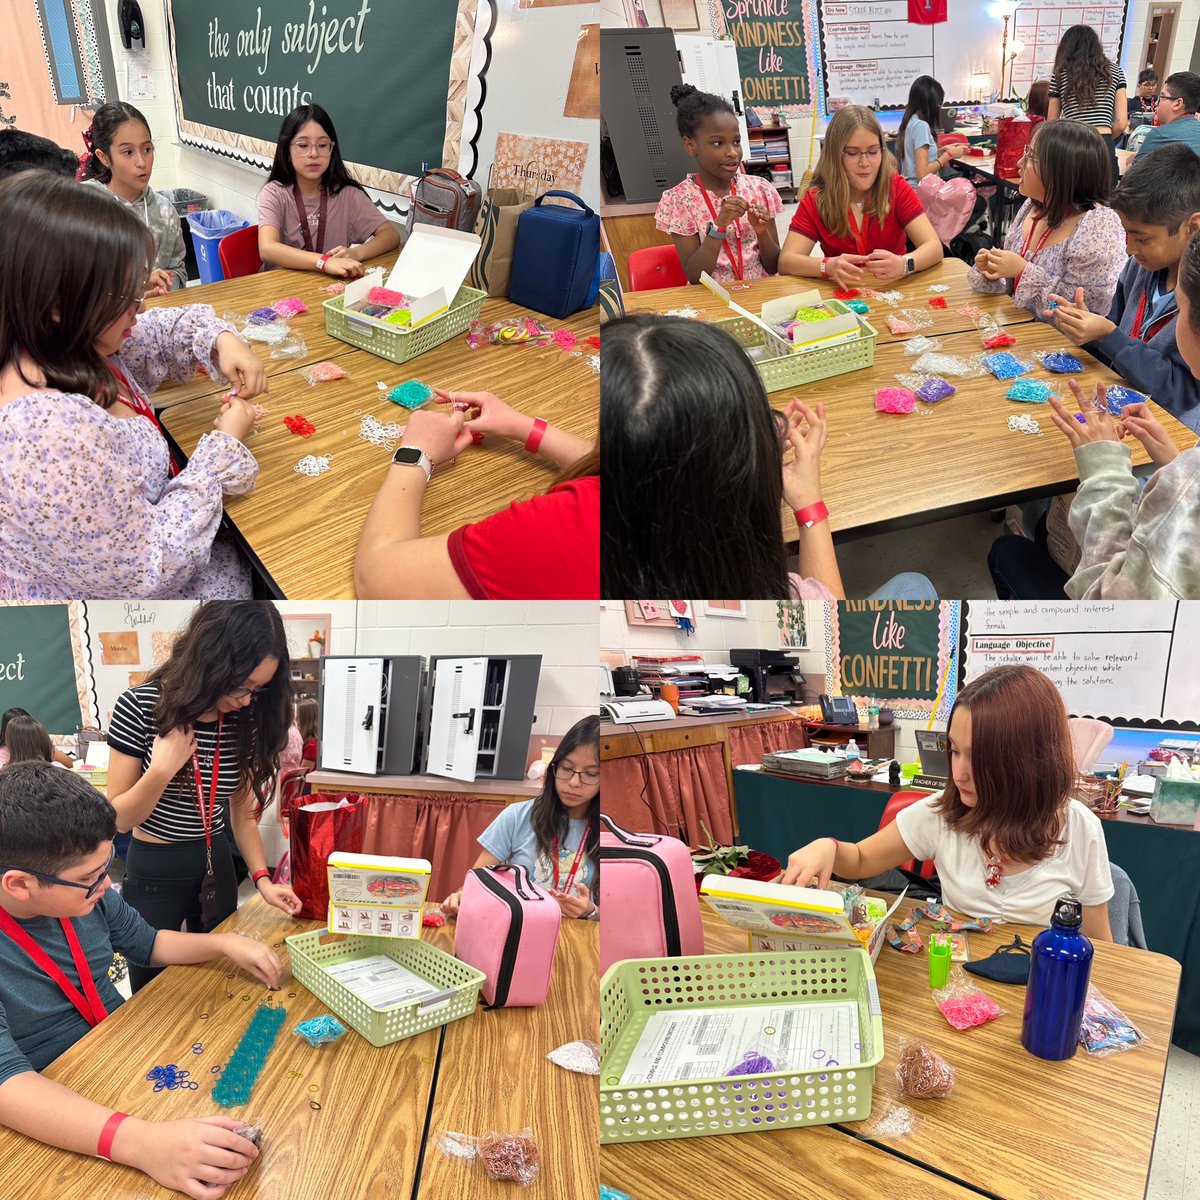 For today’s #SpartanSpotlight, Prep Academy would like to recognize Mrs. Brown’s SET class. Her students worked on creating a rainbow loom. Way to “weave” creativity into the academic day, Mrs. Brown!